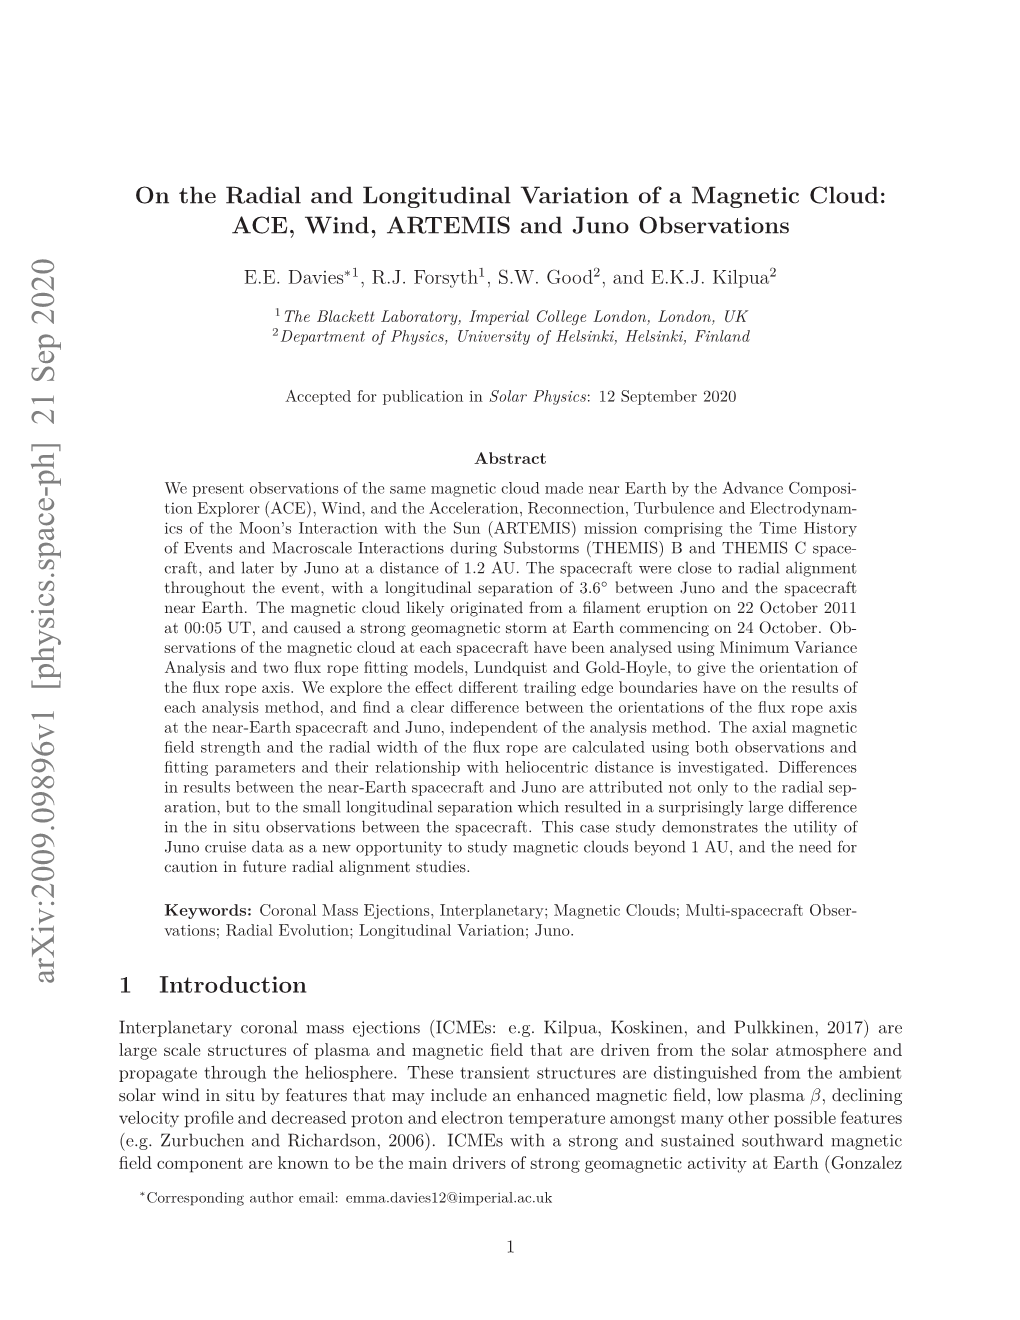 On the Radial and Longitudinal Variation of a Magnetic Cloud: ACE